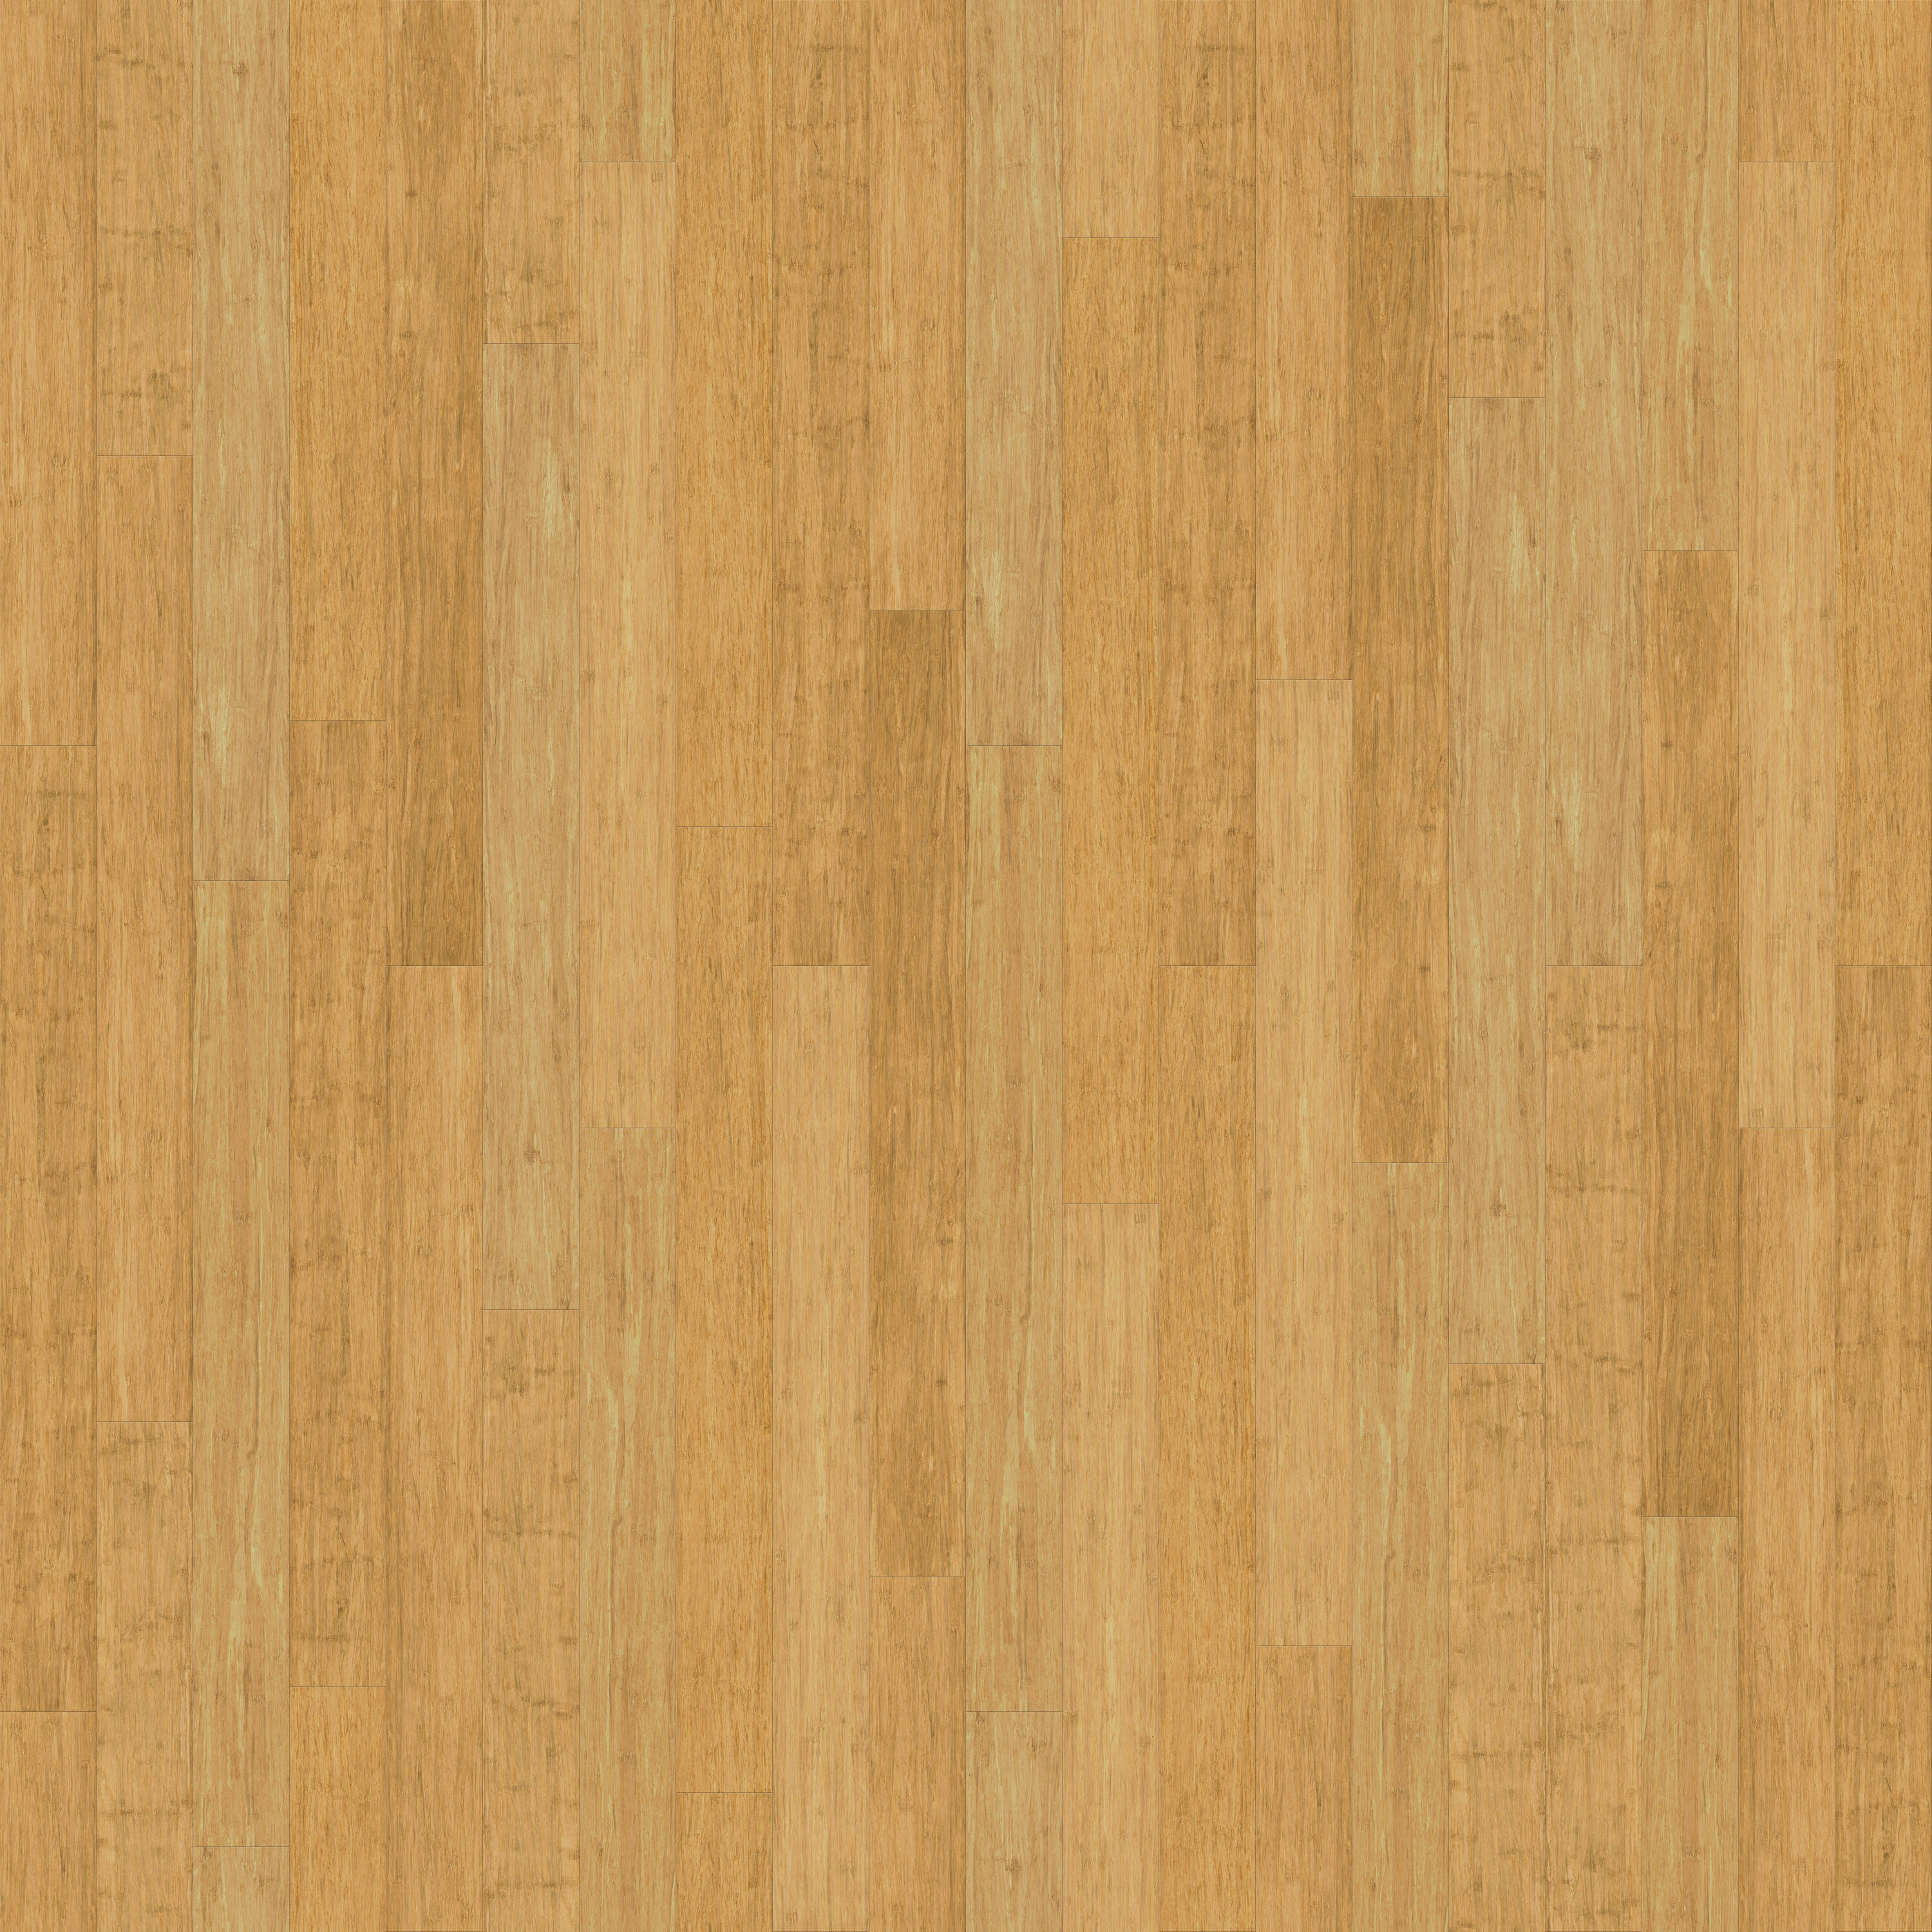 Fossilized Natural Bamboo 5-3/8-in W x 9/16-in T x Smooth/Traditional Solid Hardwood Flooring (27.01-sq ft) in Gold | - CALI 7003003300